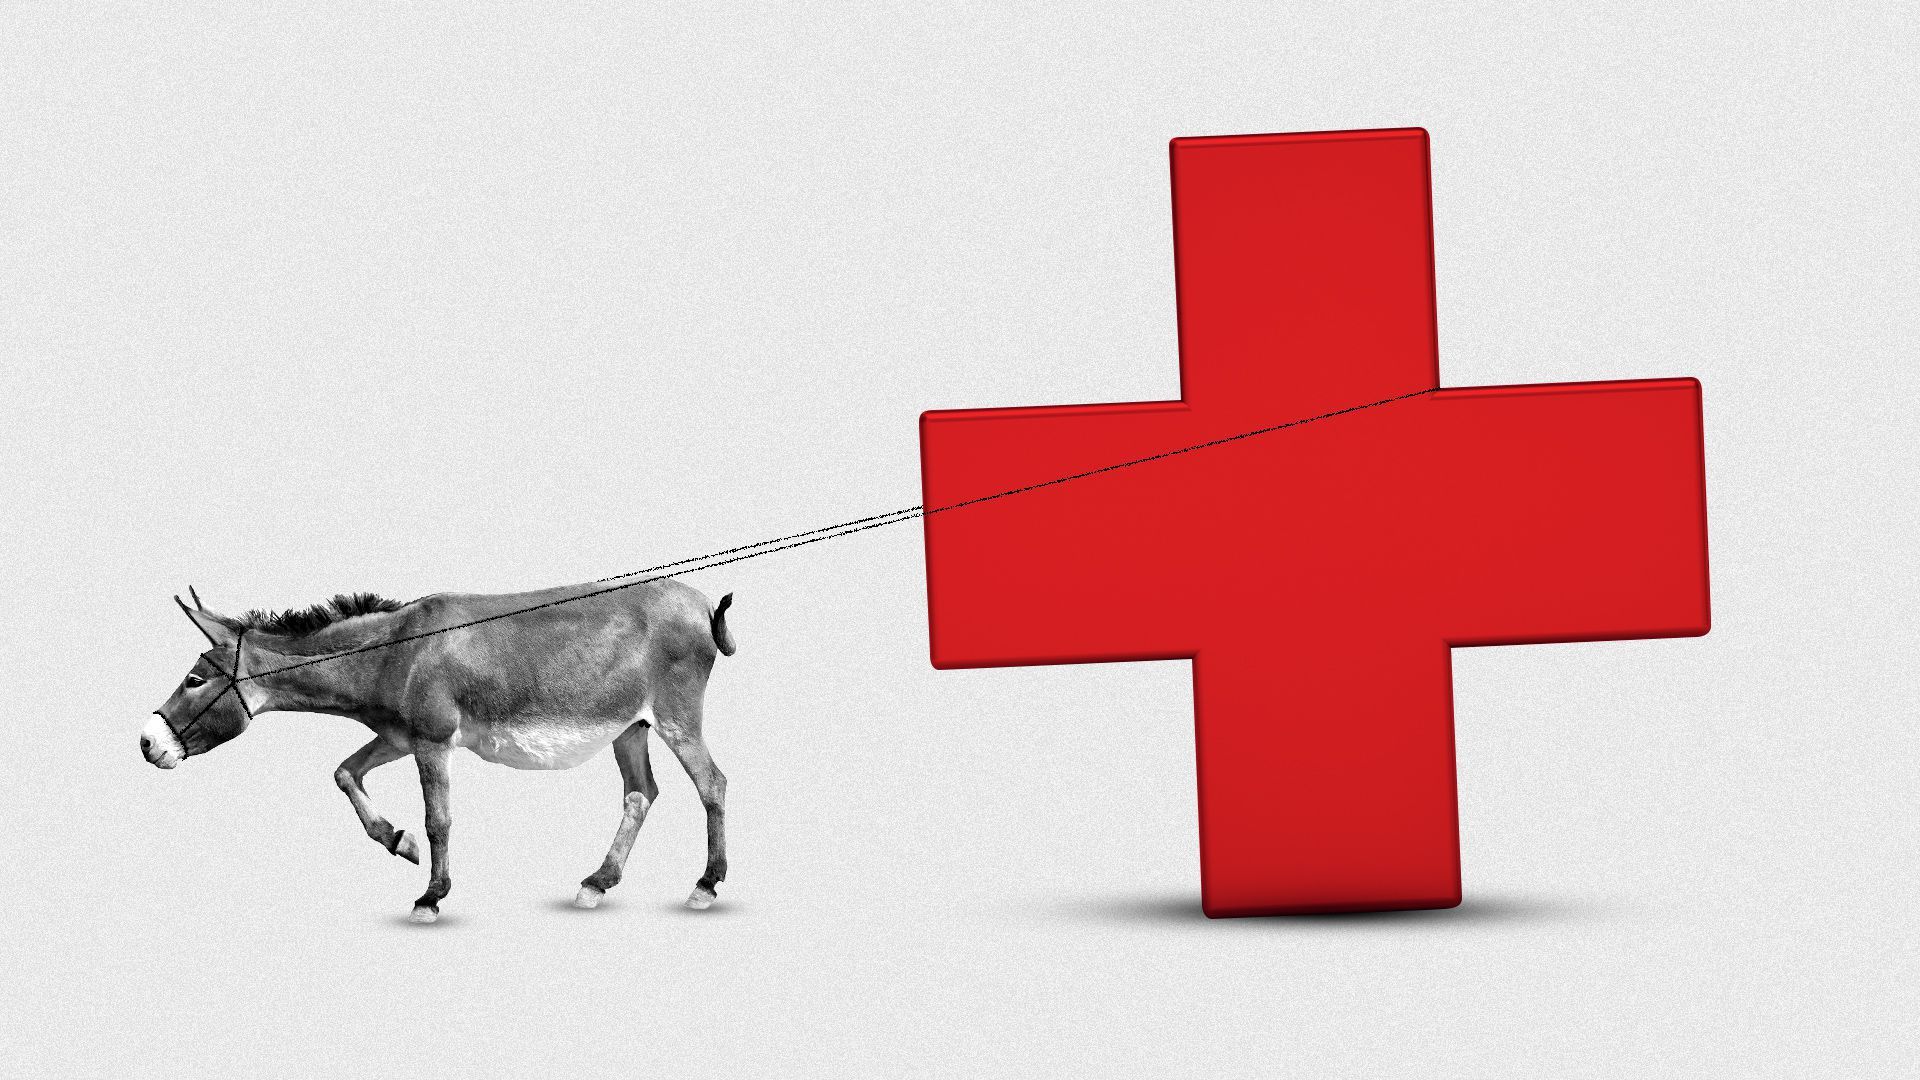 A donkey dragging a large red medical cross.